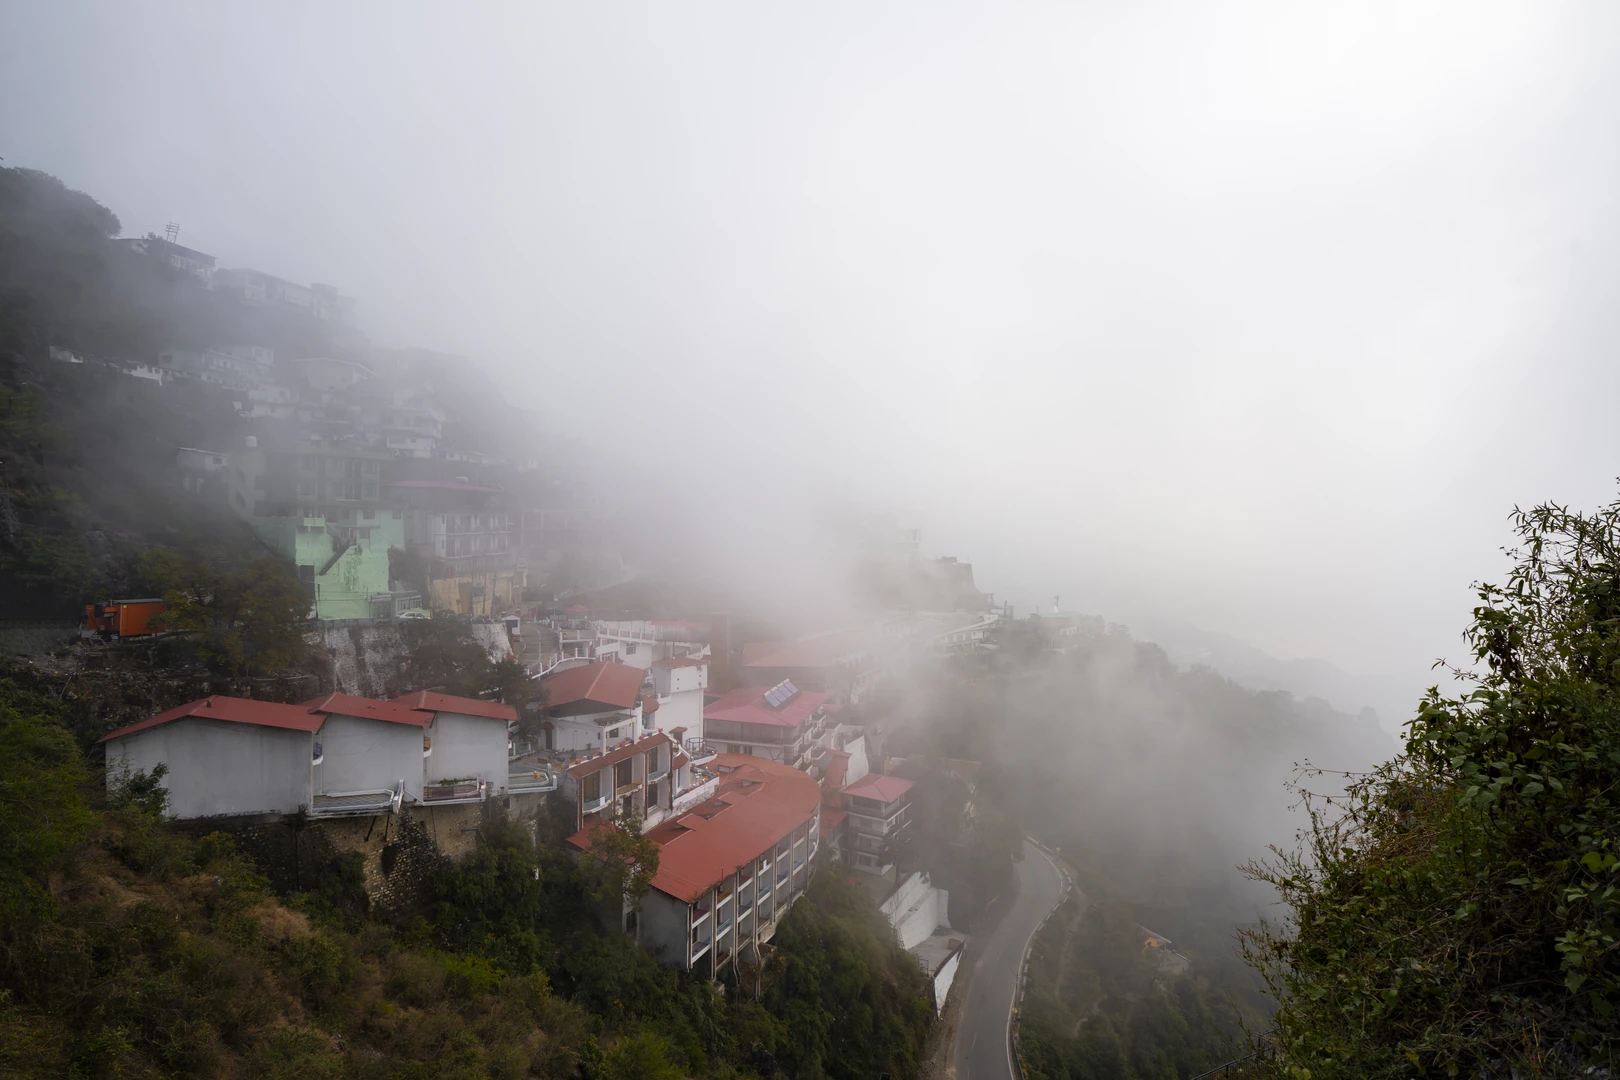 Mussoorie Picture Palace